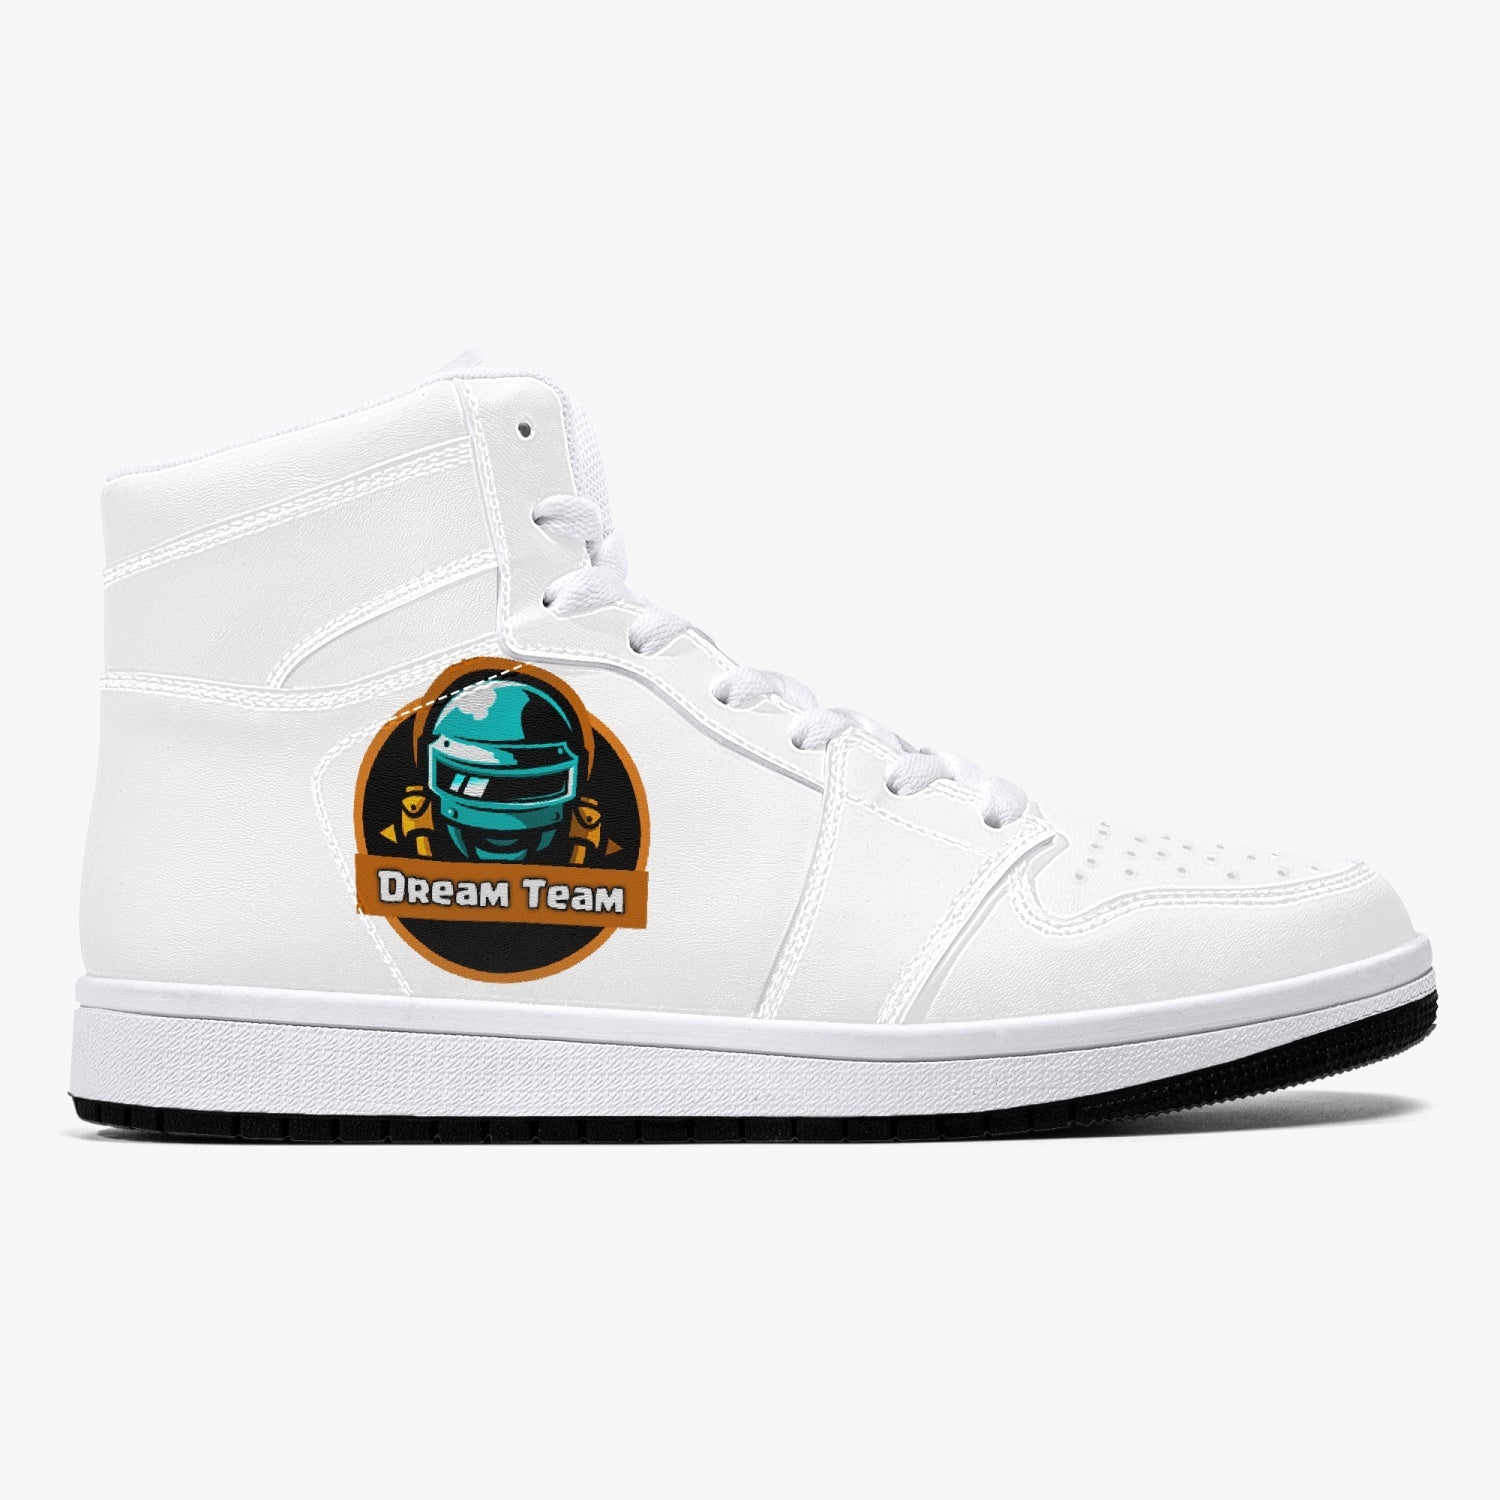 t-drt High-Top Leather Sneakers - White / Black